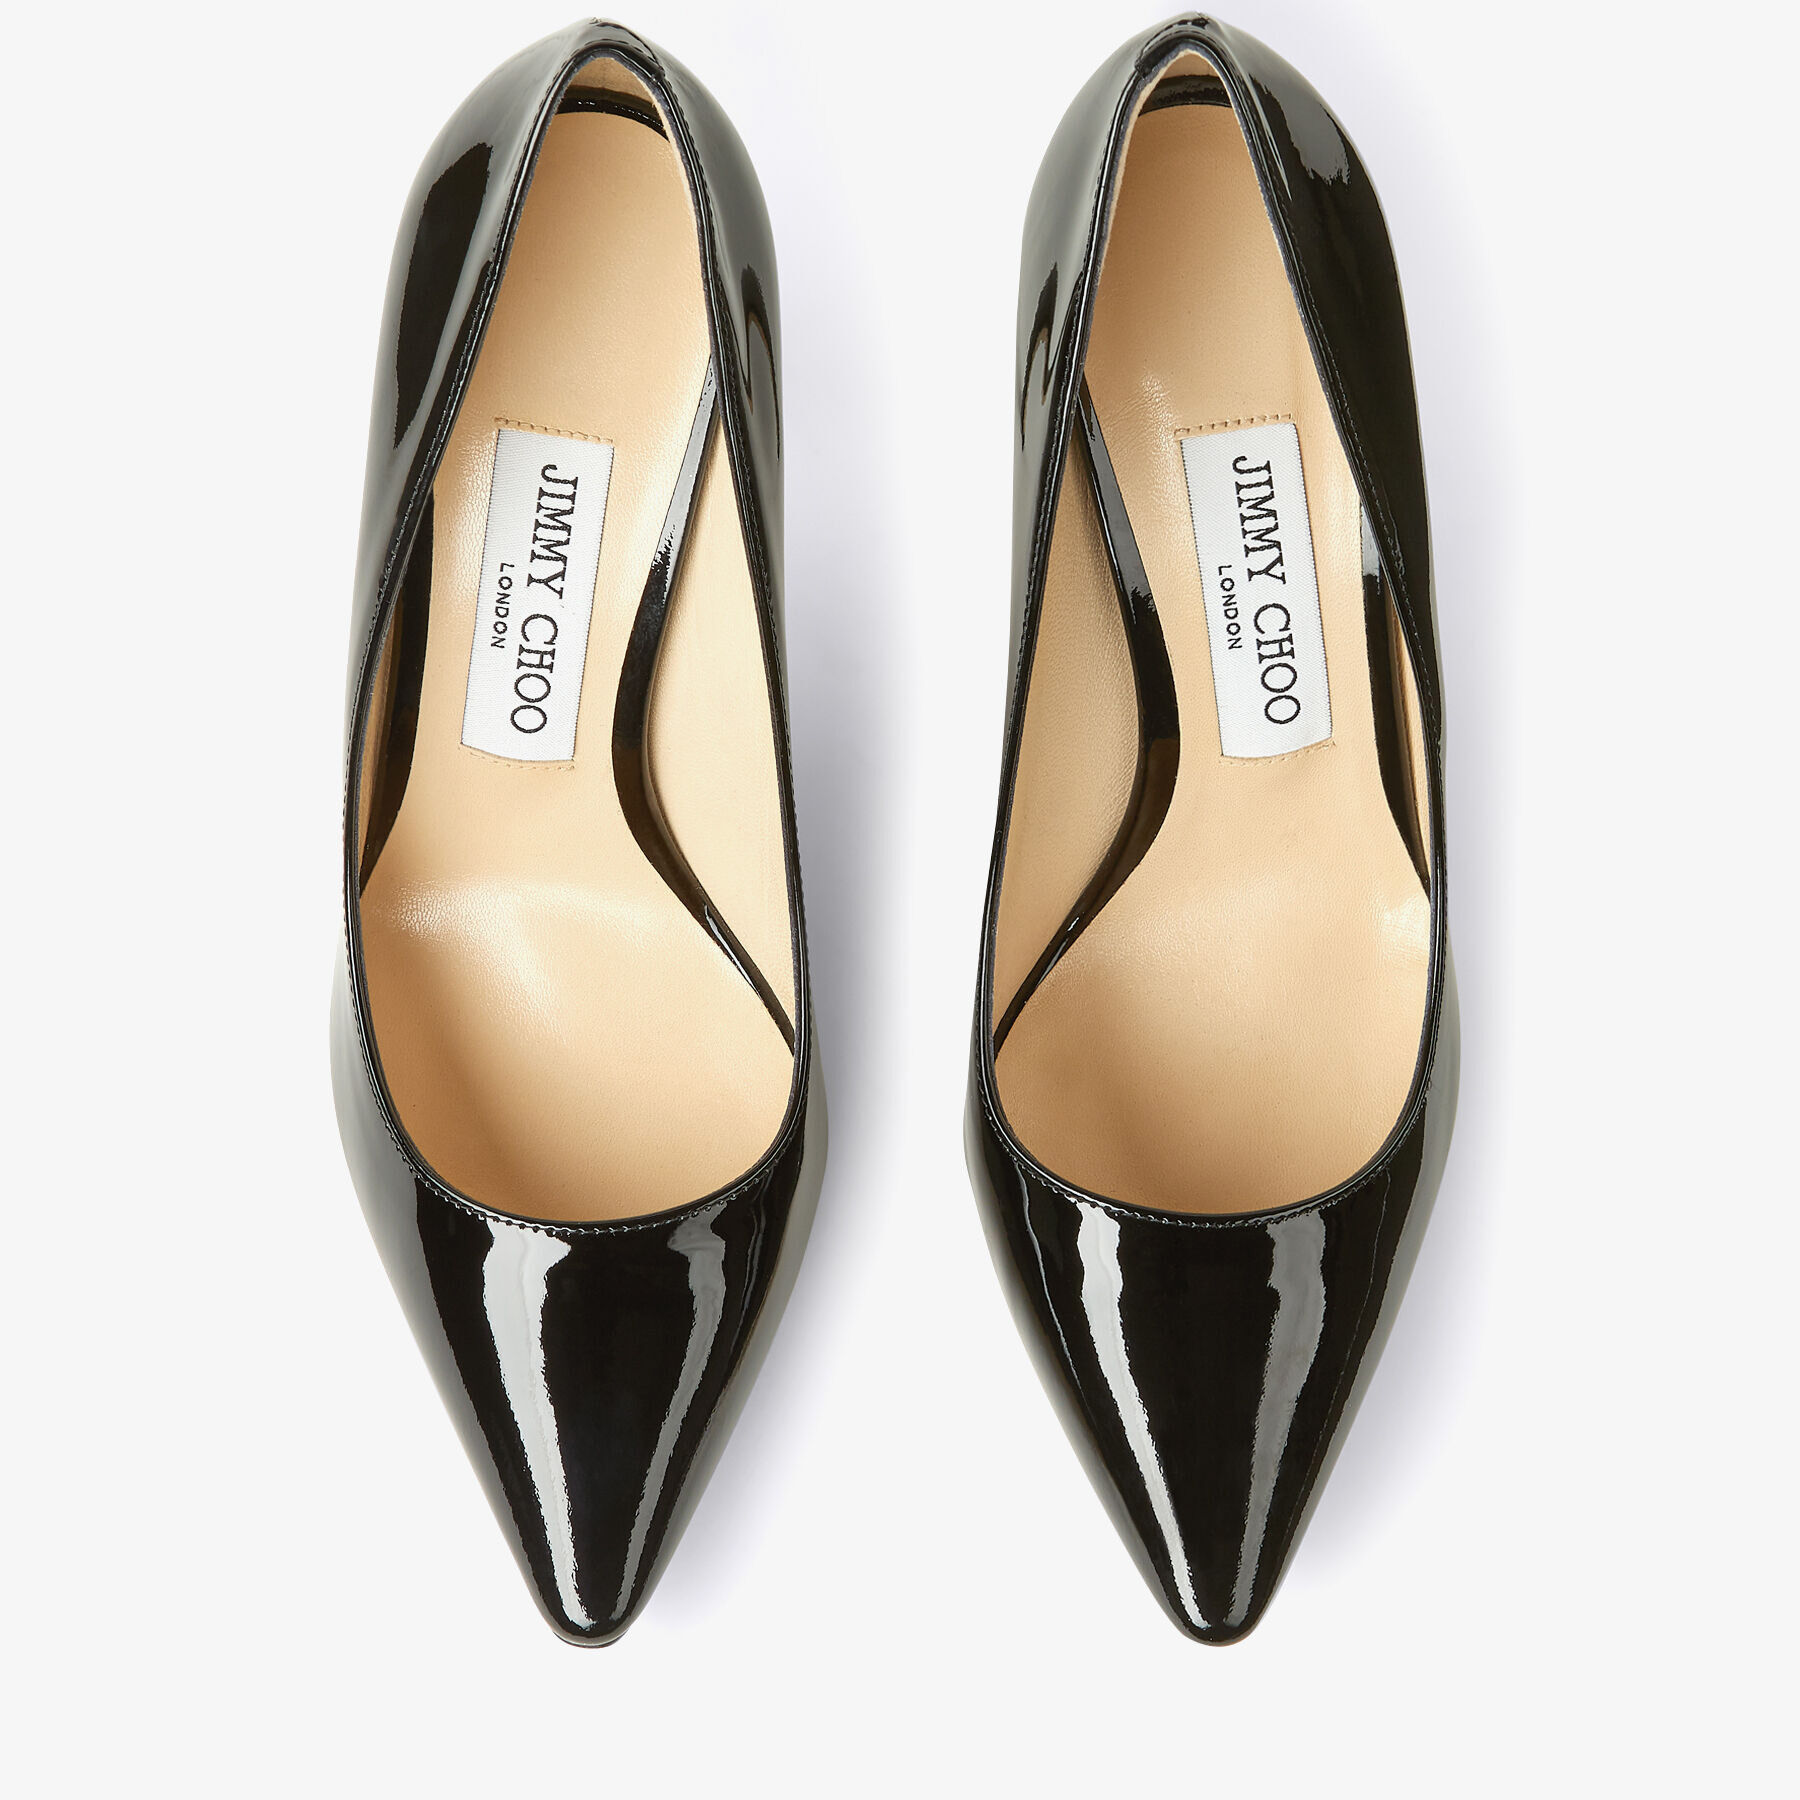 Black Patent Leather Pointy Toe Pumps | Romy 100 | Pre Fall 16 